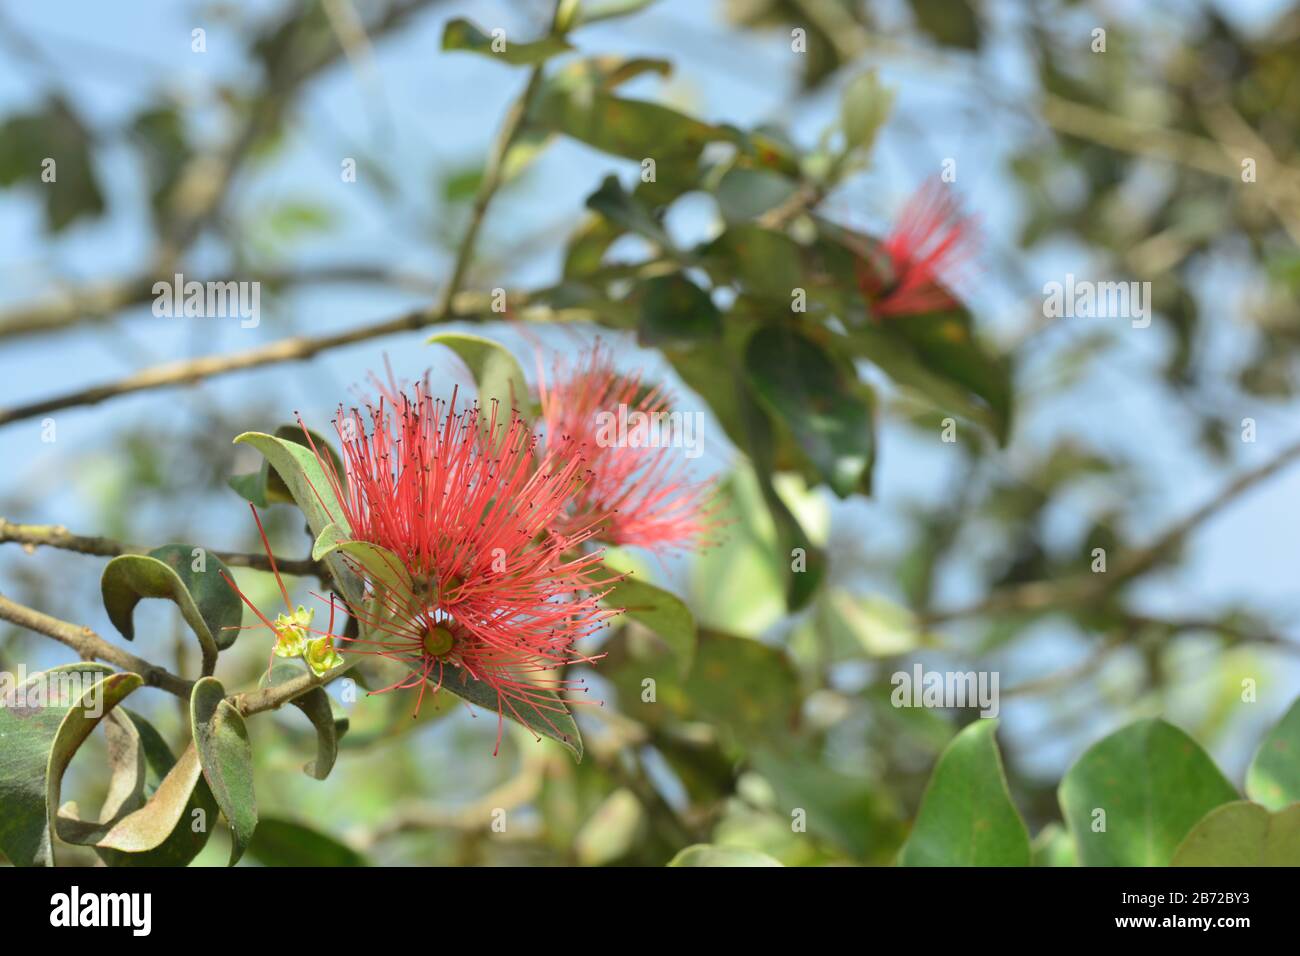 Flowers and leaves of the Syzygium Fruit Stock Photo